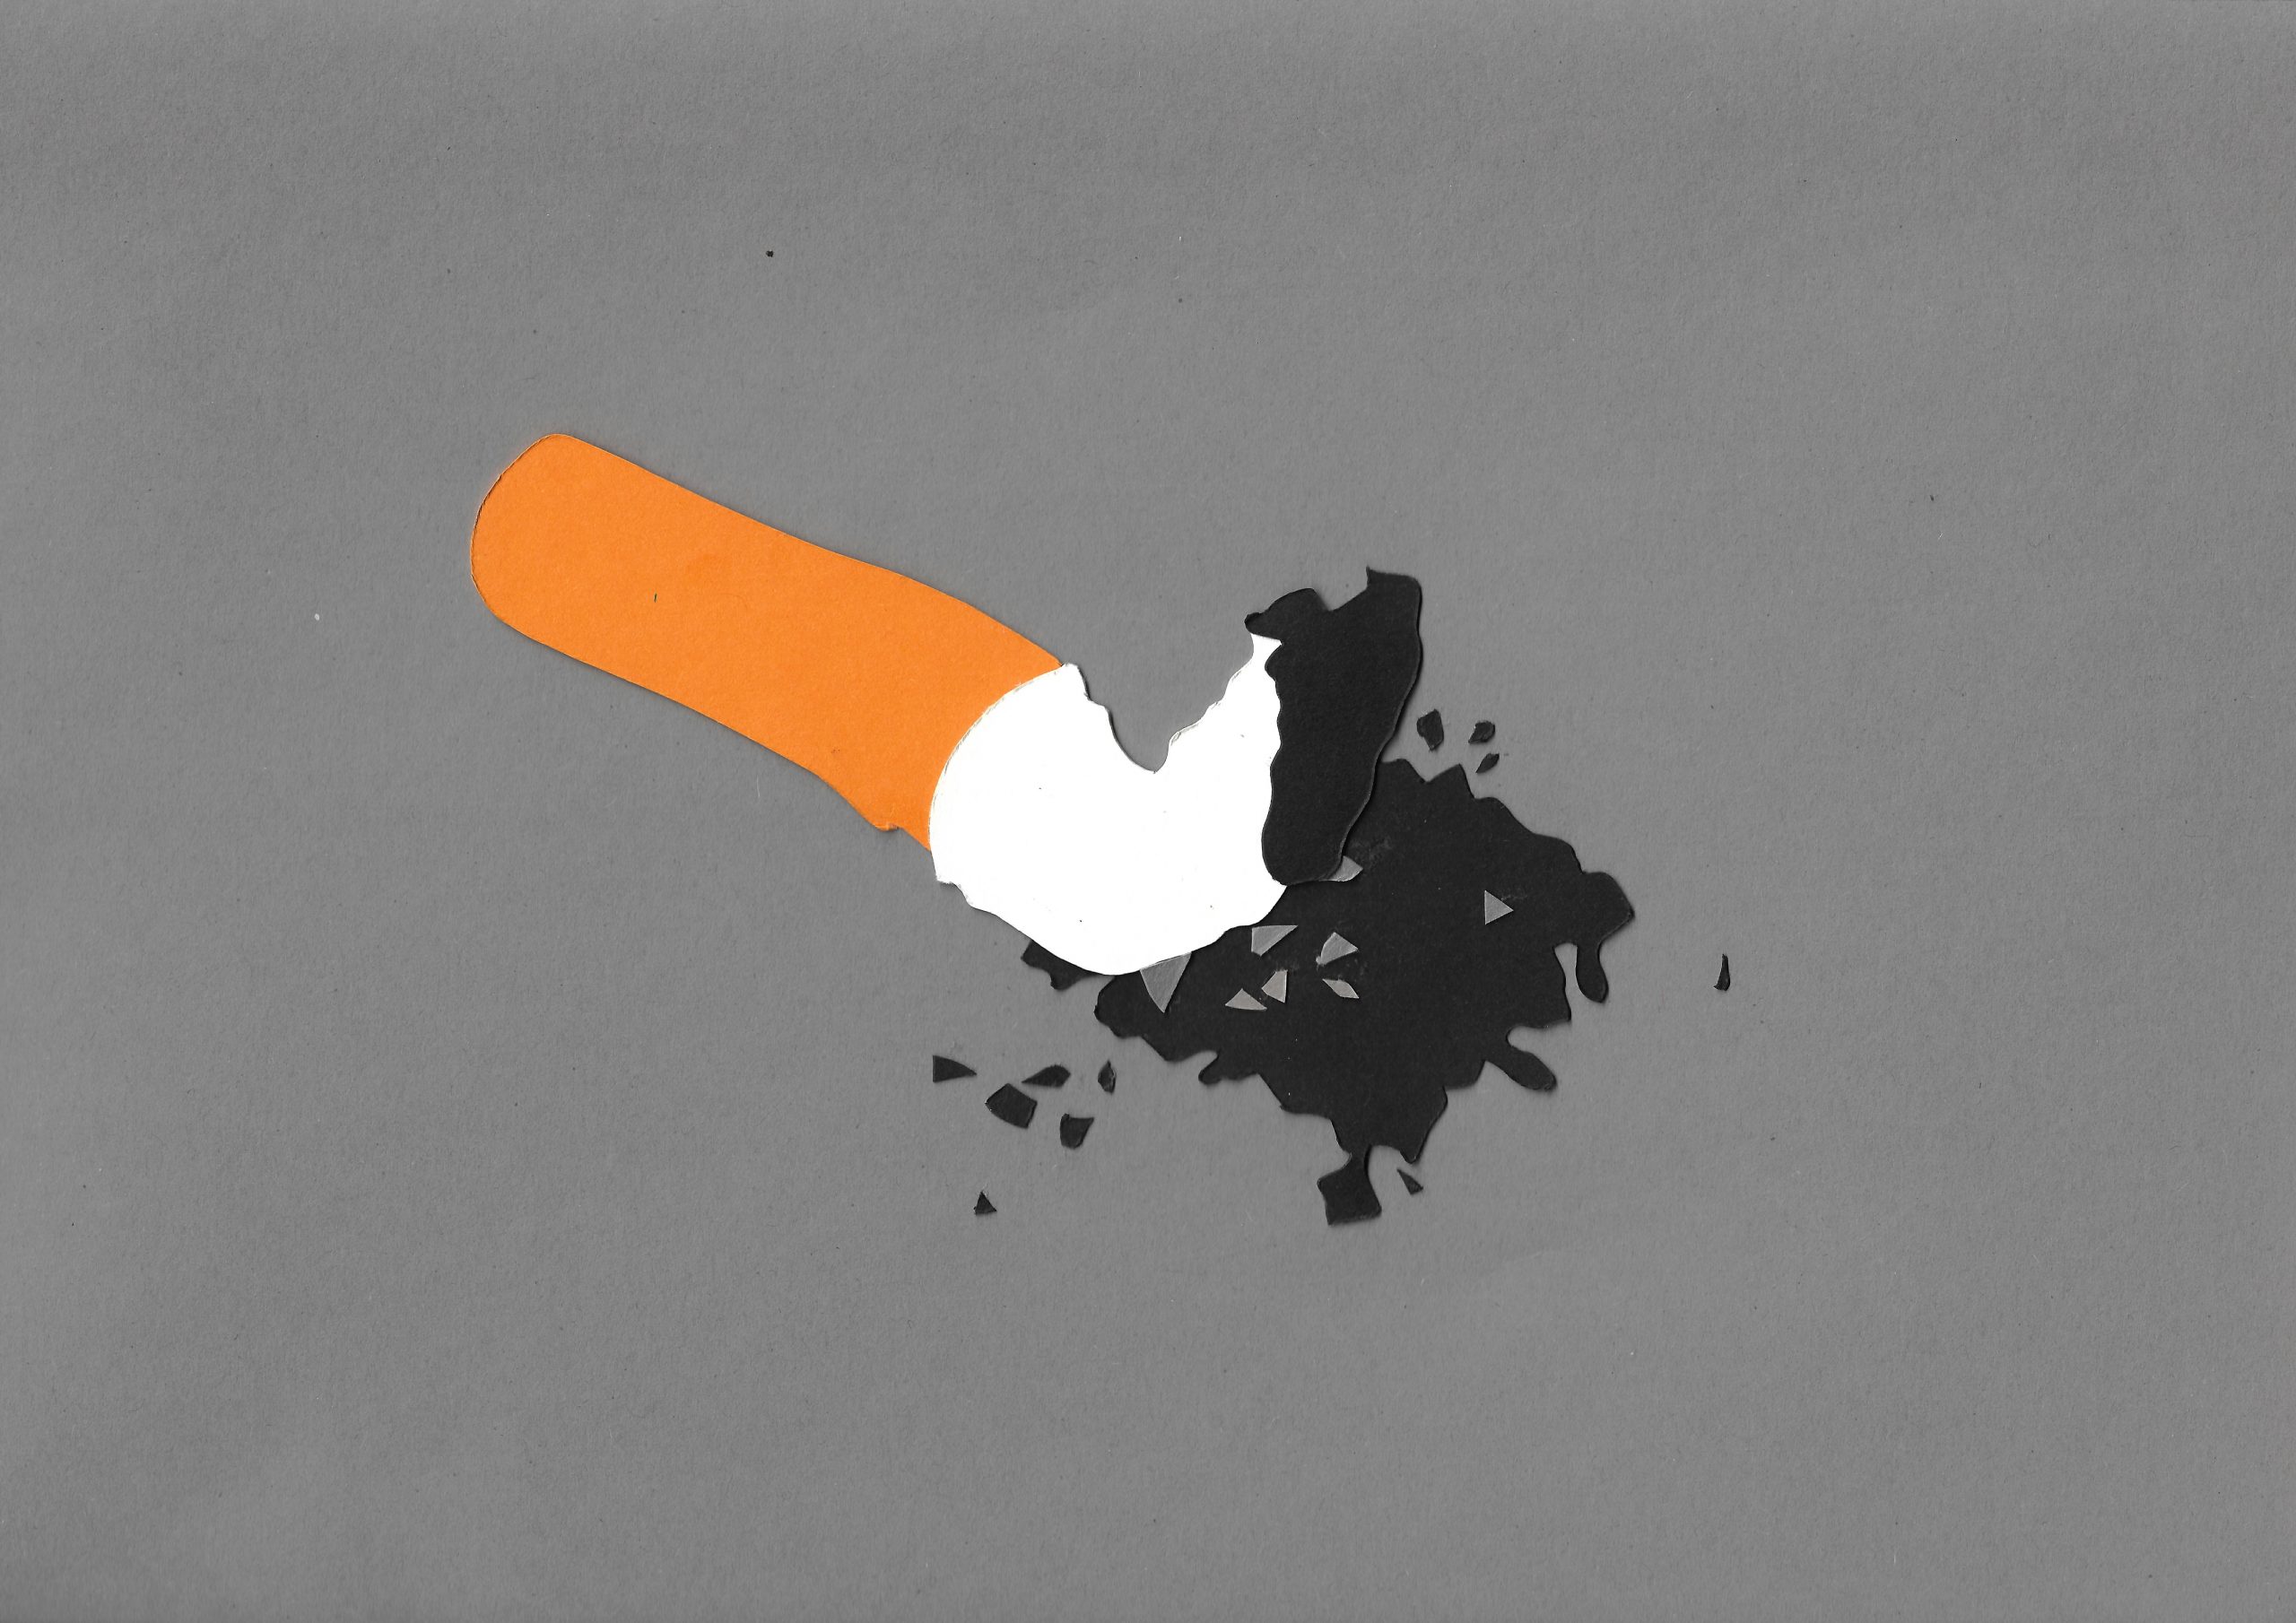 Paper cutout of a stomped-out cigarette butt.